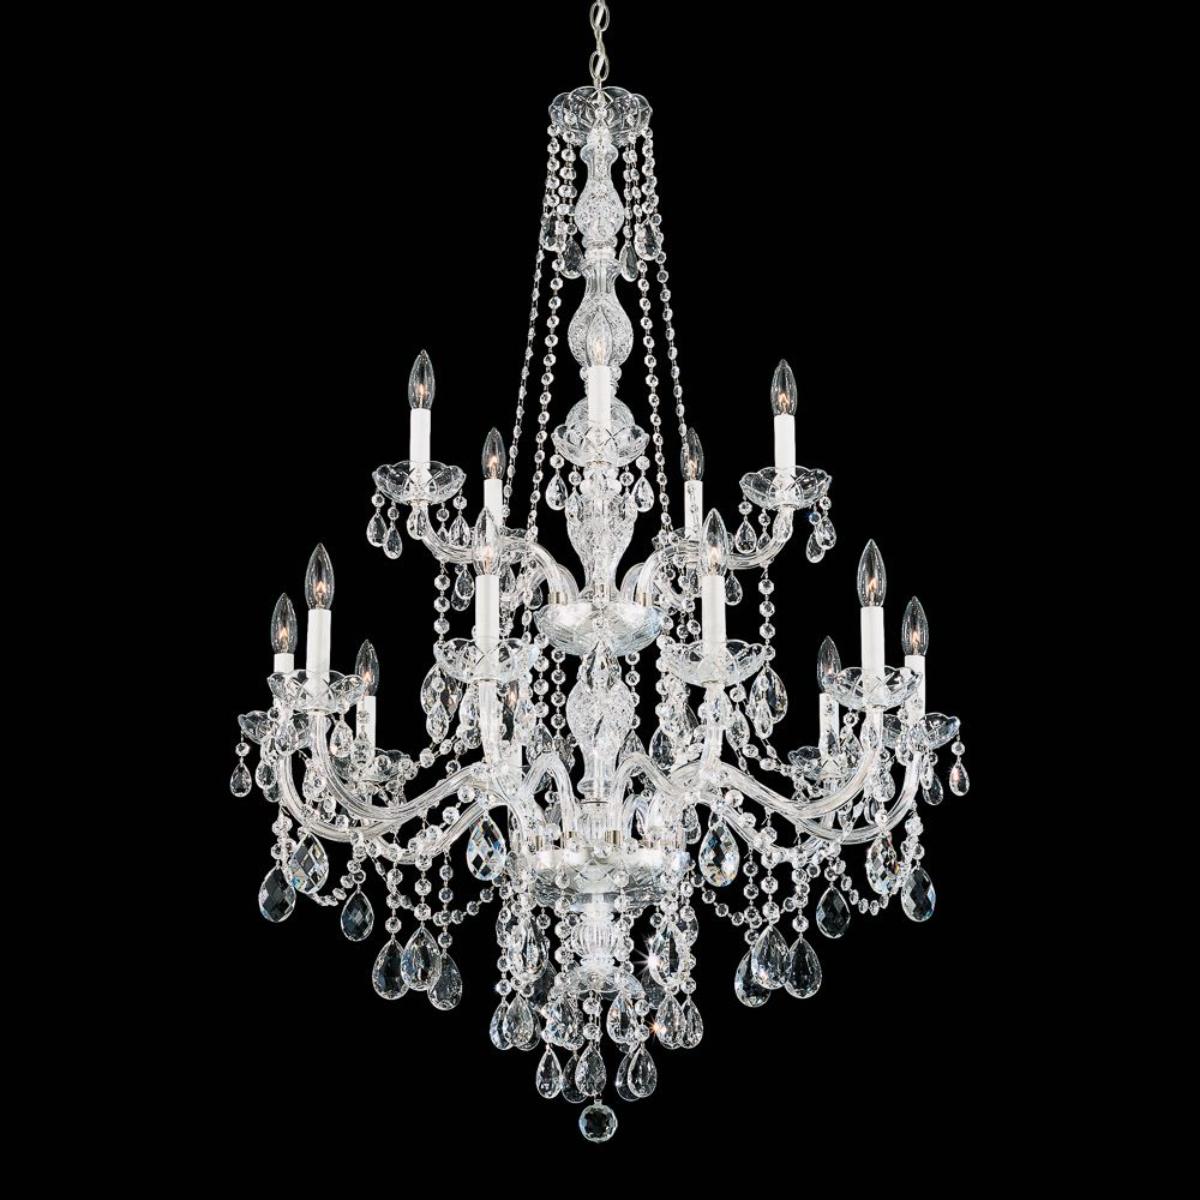 Arlington 15 Lights Polished Silver Chandelier with Clear Heritage Crystals